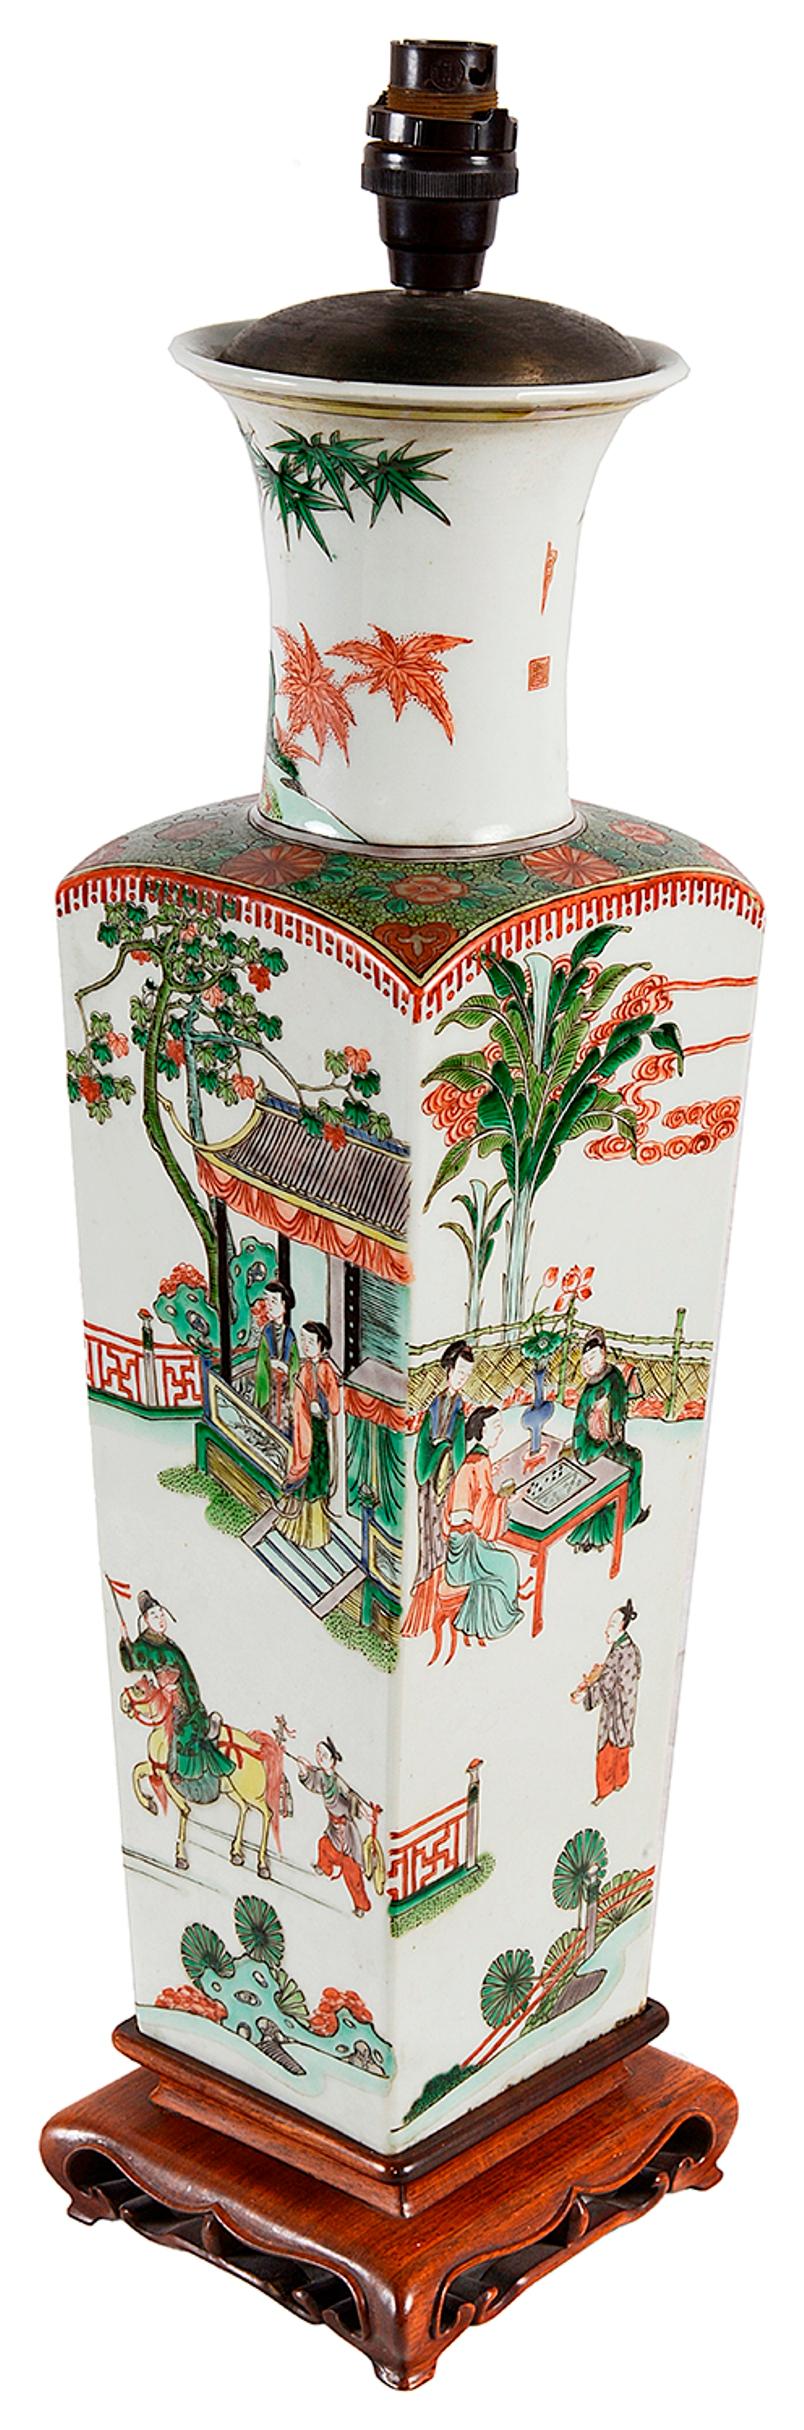 A very good quality 18th century style Chinese Famille verte vase / lamp. Having bold classical Chinese scenes of courtiers under pagoda buildings and in gardens playing games and on horse back. Mounted on a carved hardwood stand.